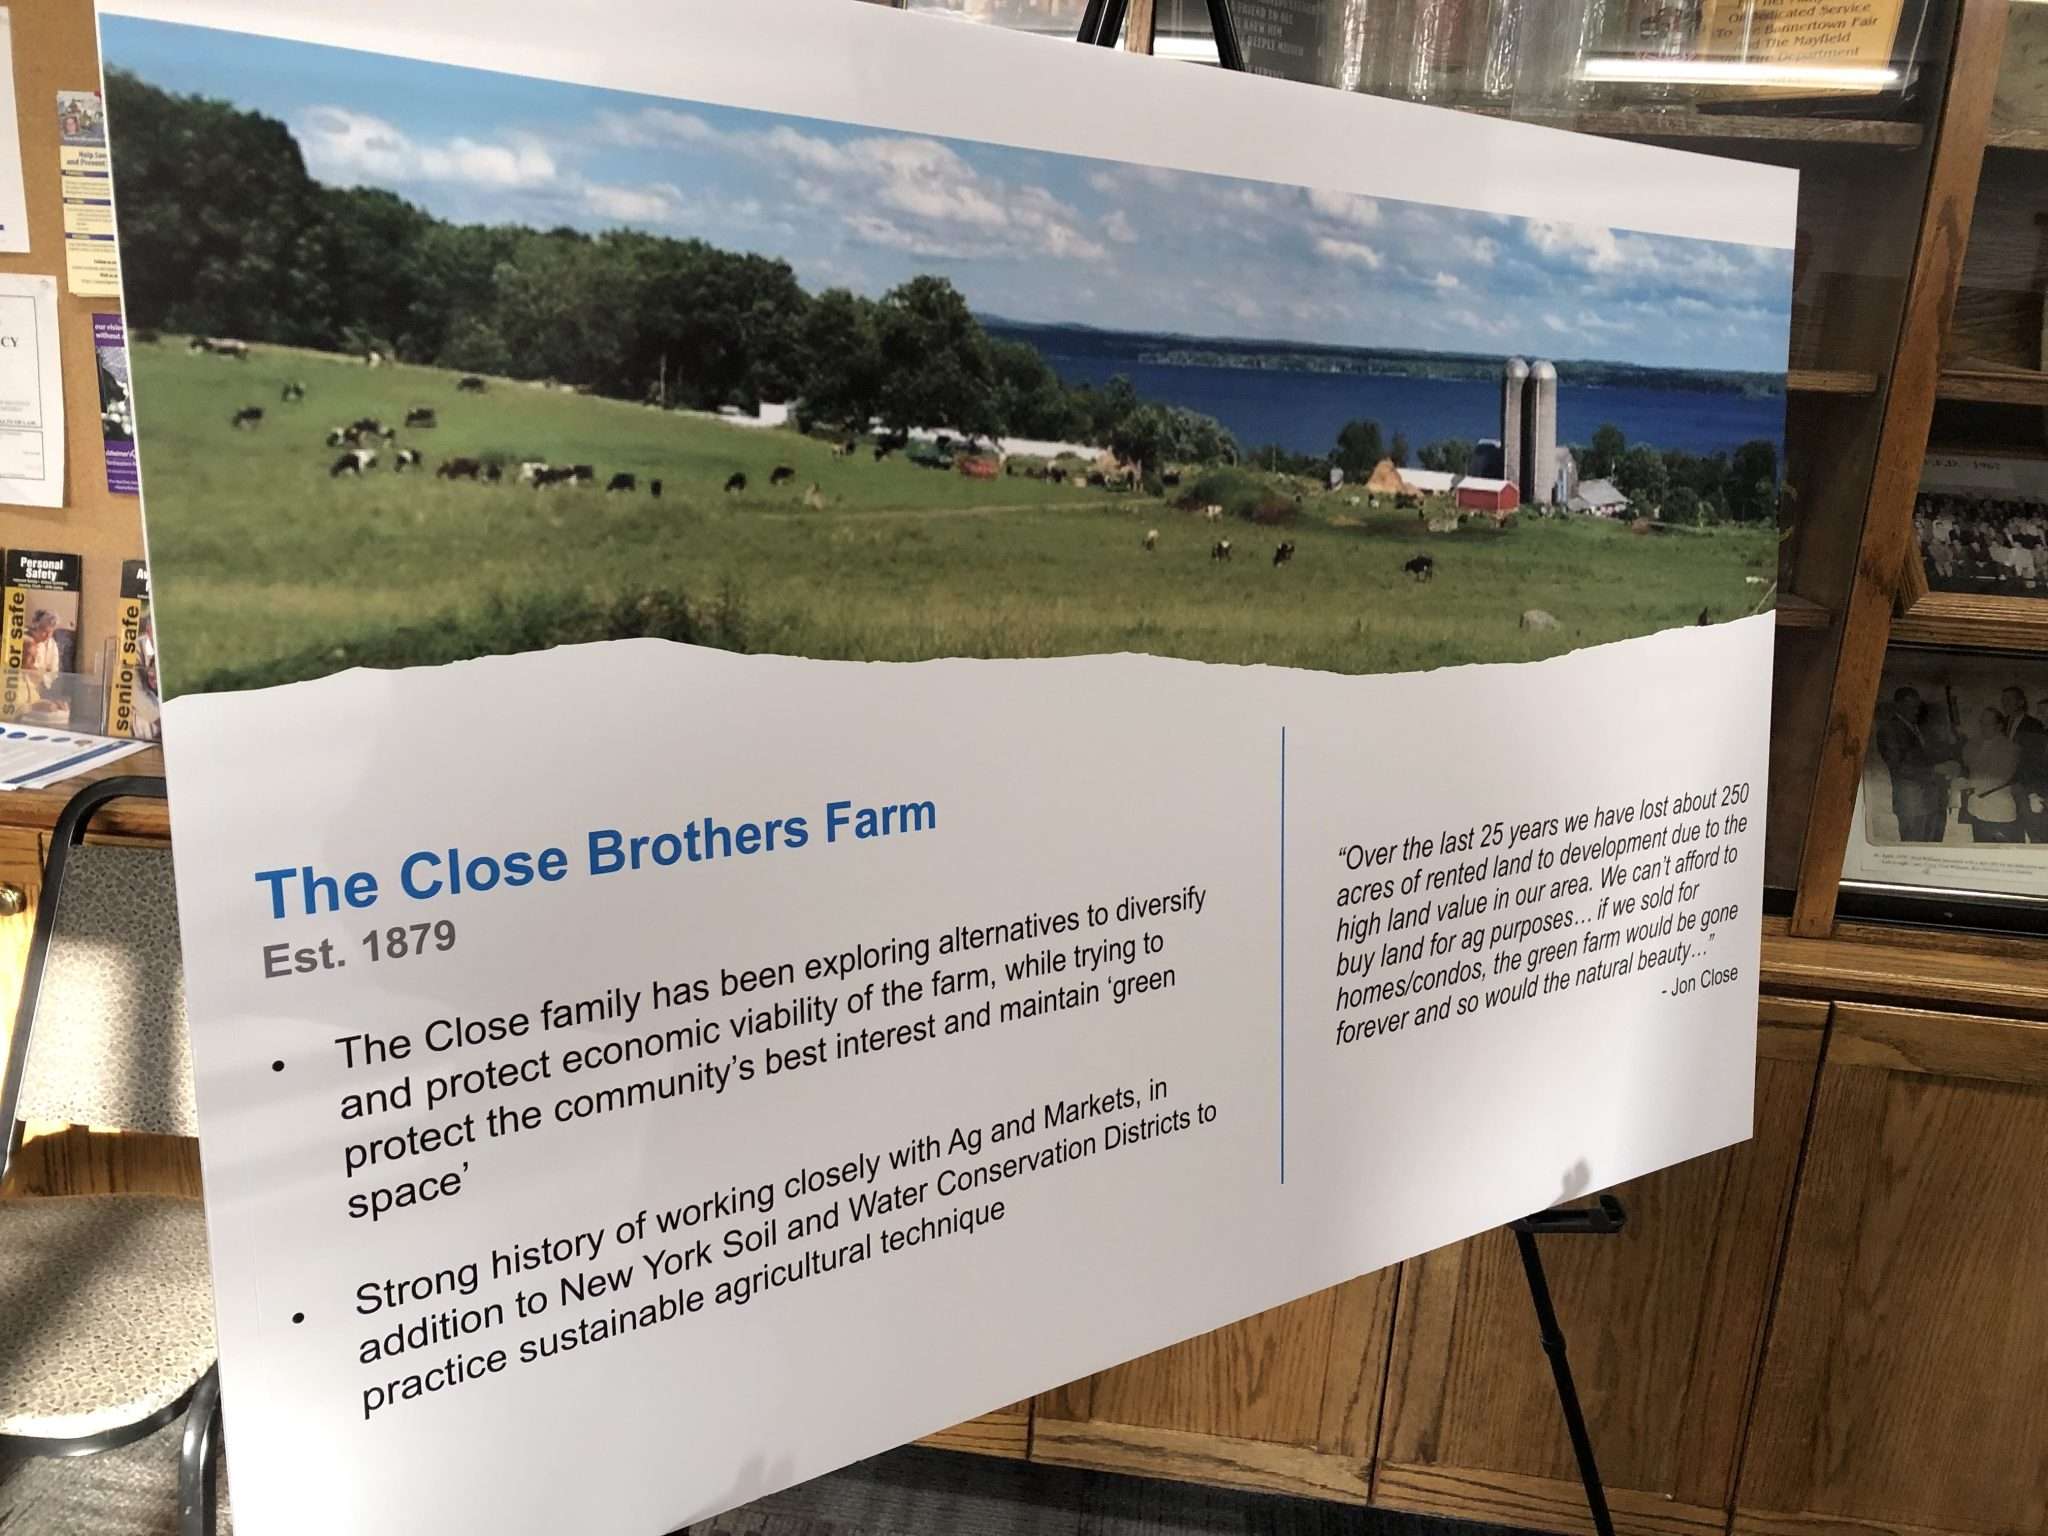 A poster board shows a photo of the Close Brothers Farm in Mayfield with a view of Great Sacandaga Lake in the distance.